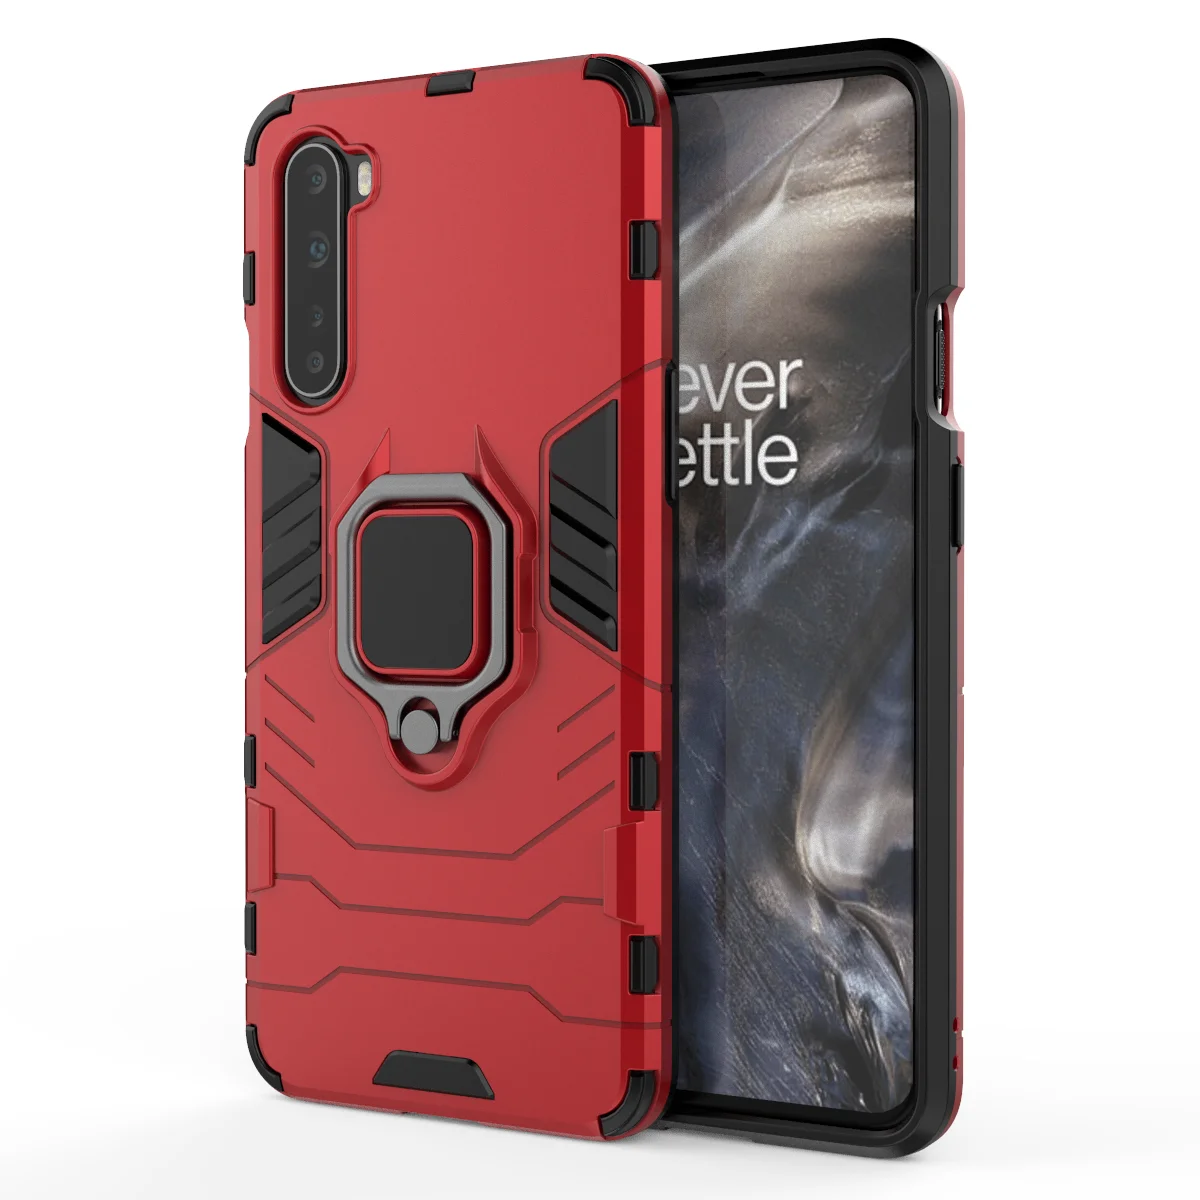 

Armor Anti Shockproof Metal PC Back Phone Case For Oneplus 9 Pro Mobile Cover For 1+9 With Ring Stand Holder